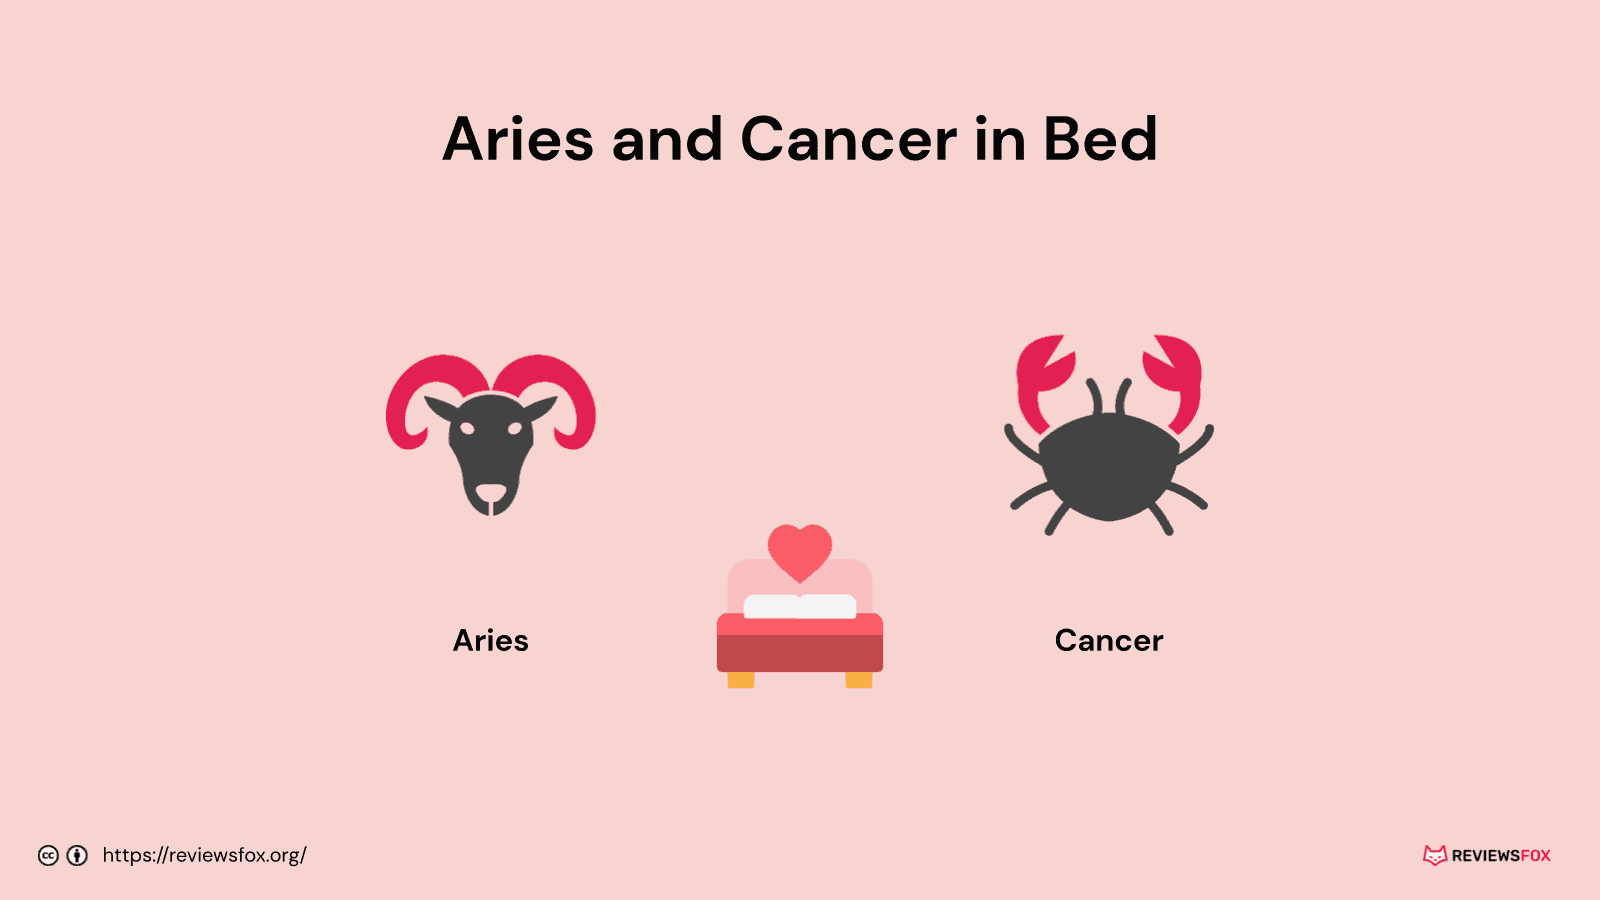 Aries and Cancer in bed